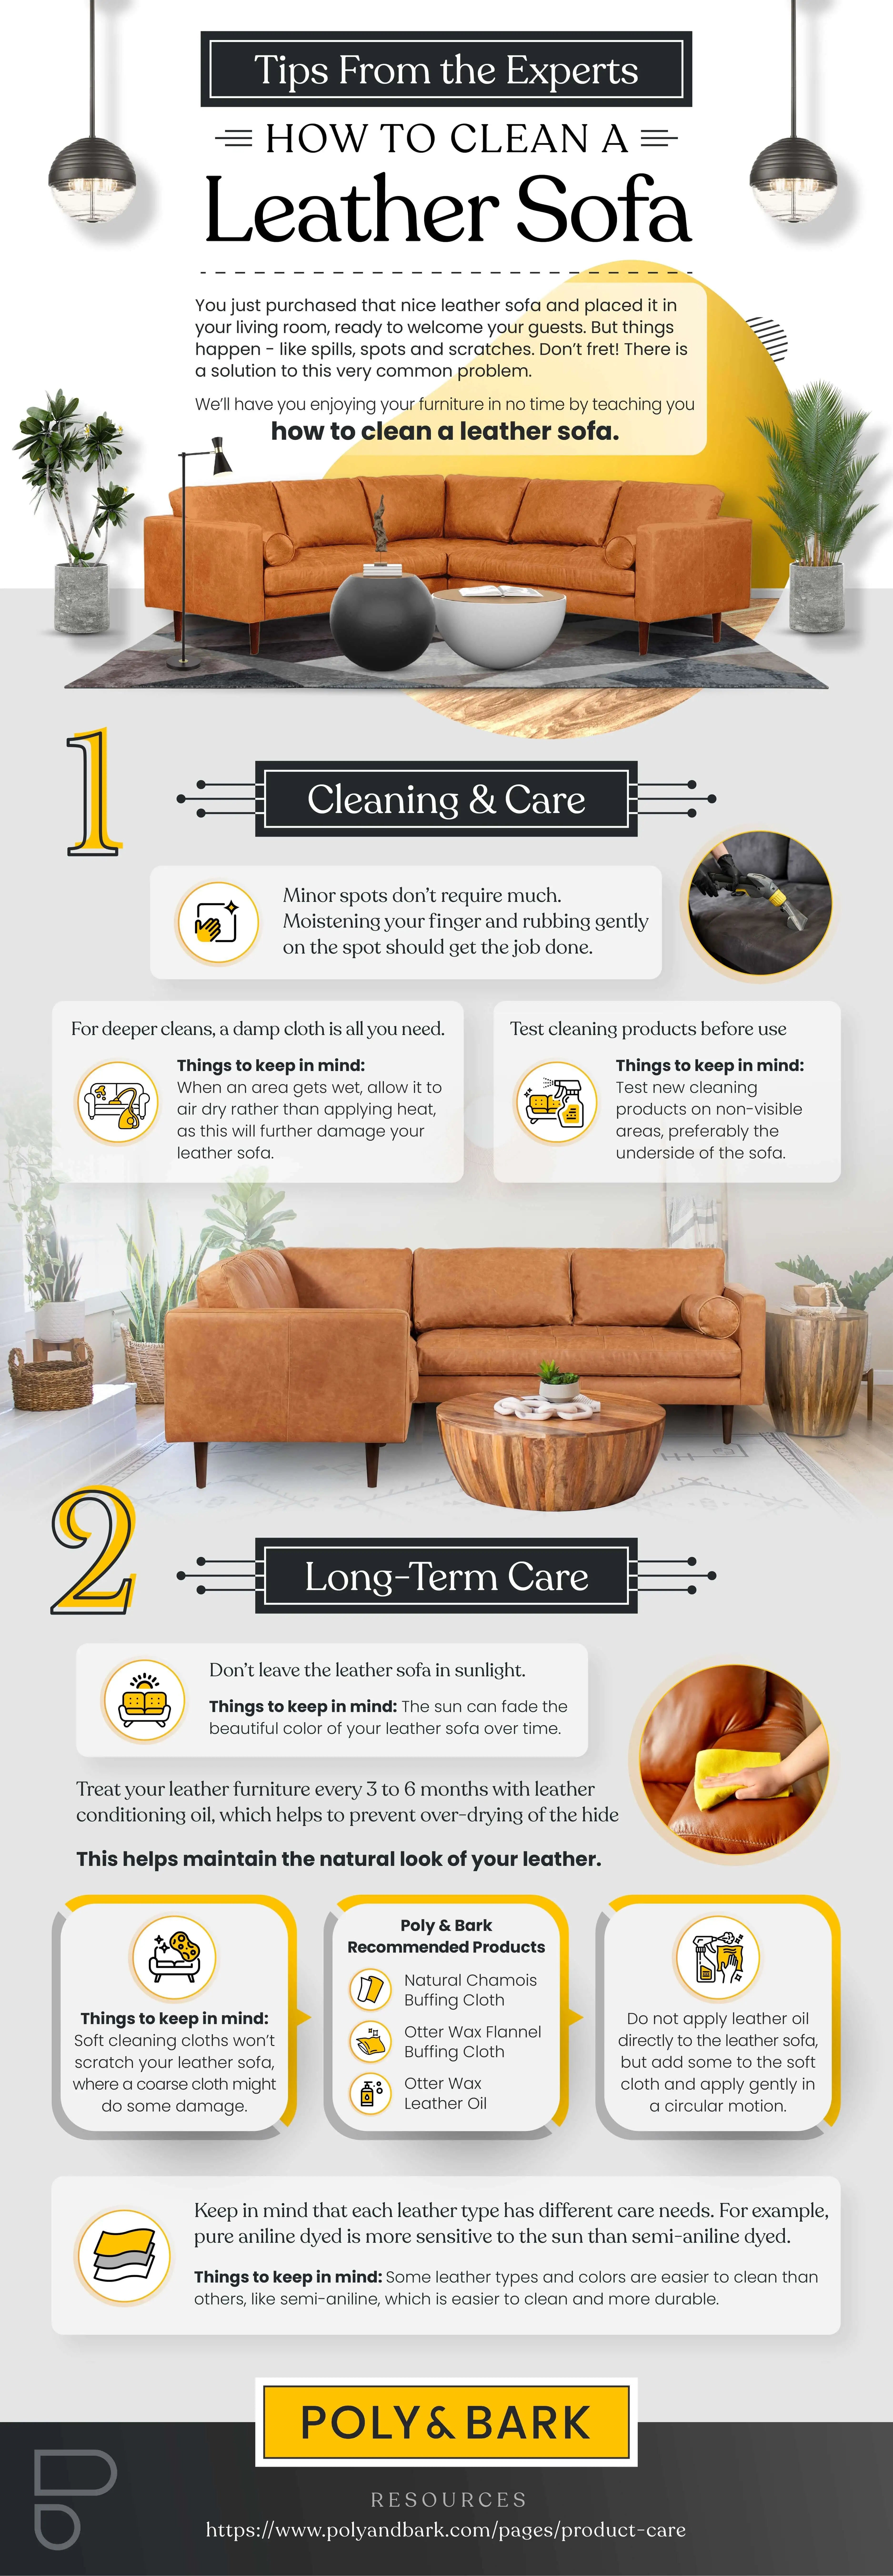 The Best Natural DIY Leather Couch Cleaner - At Home On The Prairie